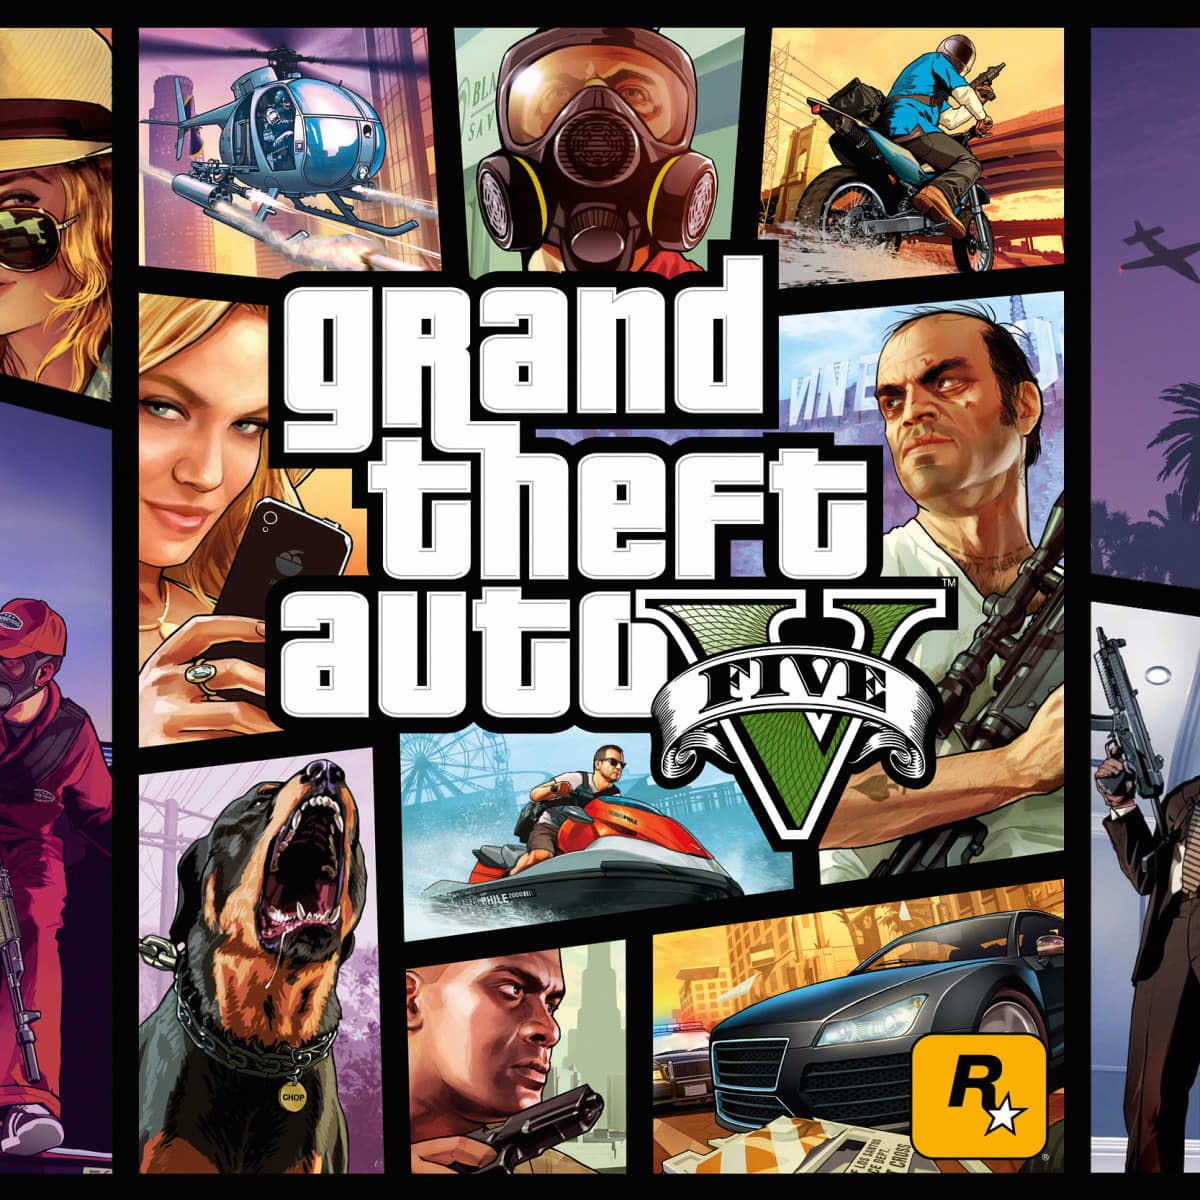 Top 6 Games Like GTA 5 For Android 2023 HD